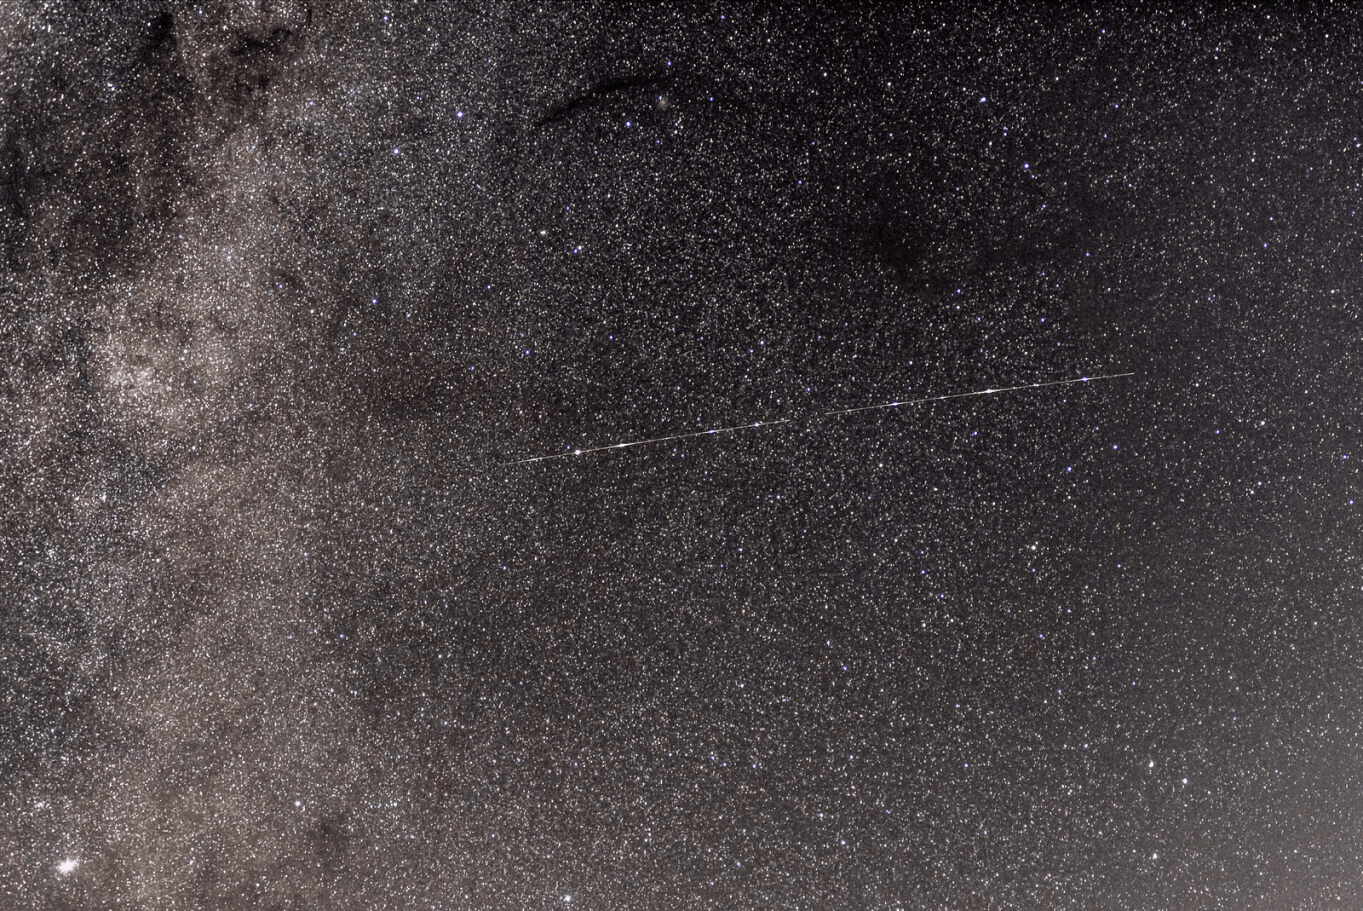 A shooting star represented by a white line against a background of millions of stars in varying shades of pink and black.